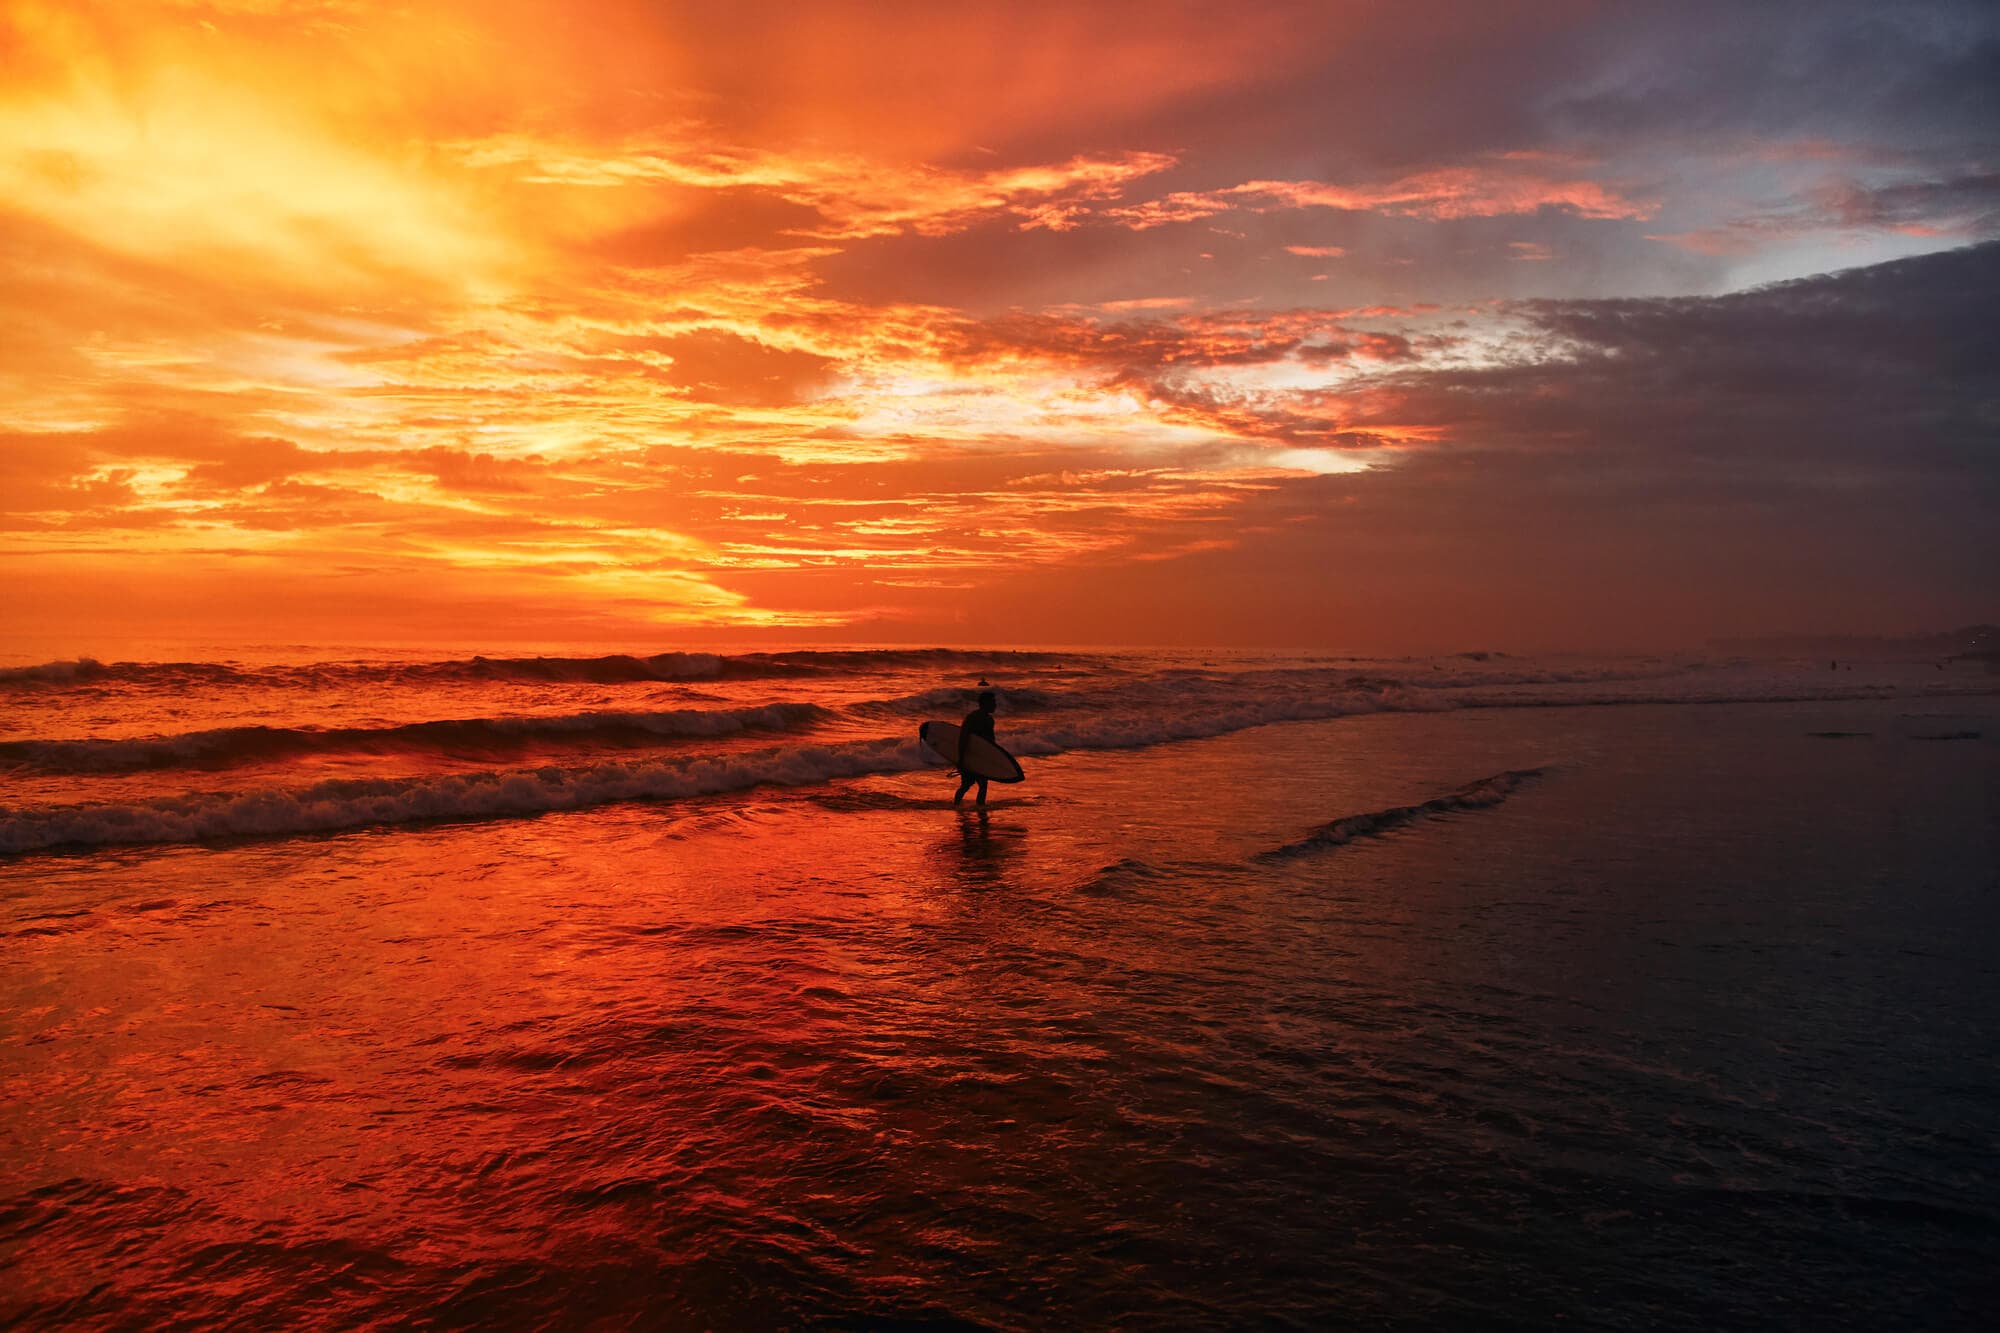 Silhouette of a surfer carrying his board on Batu Bolong Beach in Canggu during a yellow, orange and red sunset.